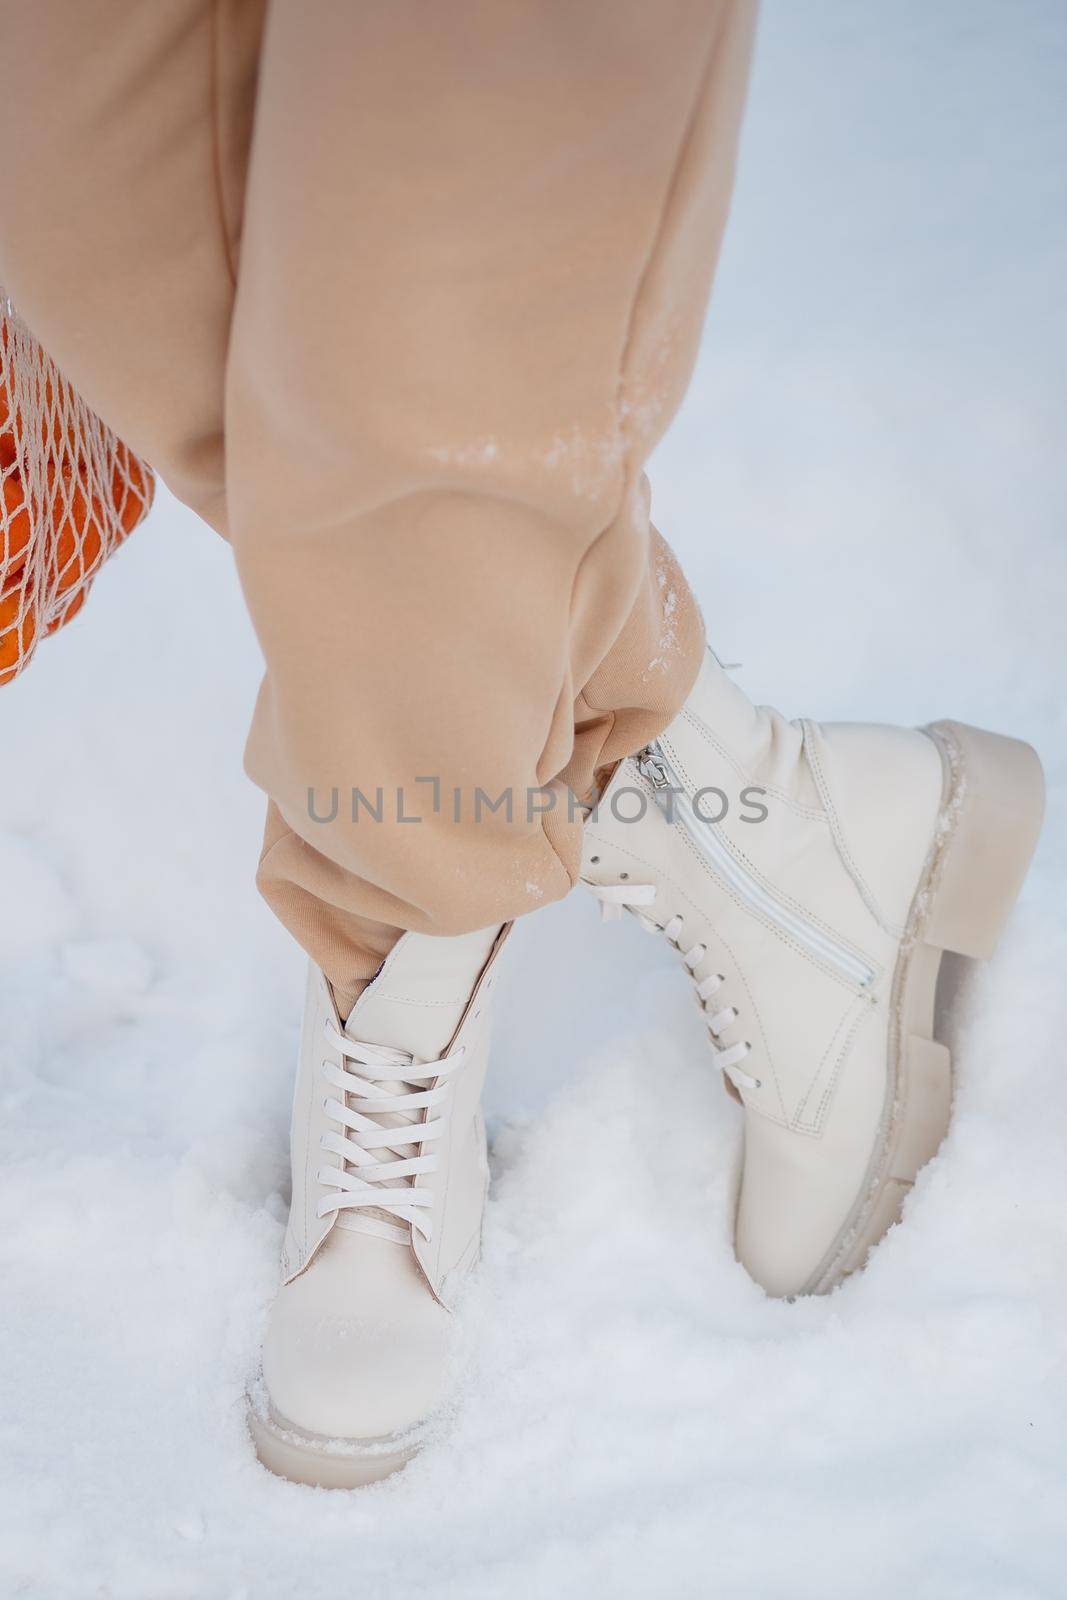 The model demonstrates women's shoes in the snow